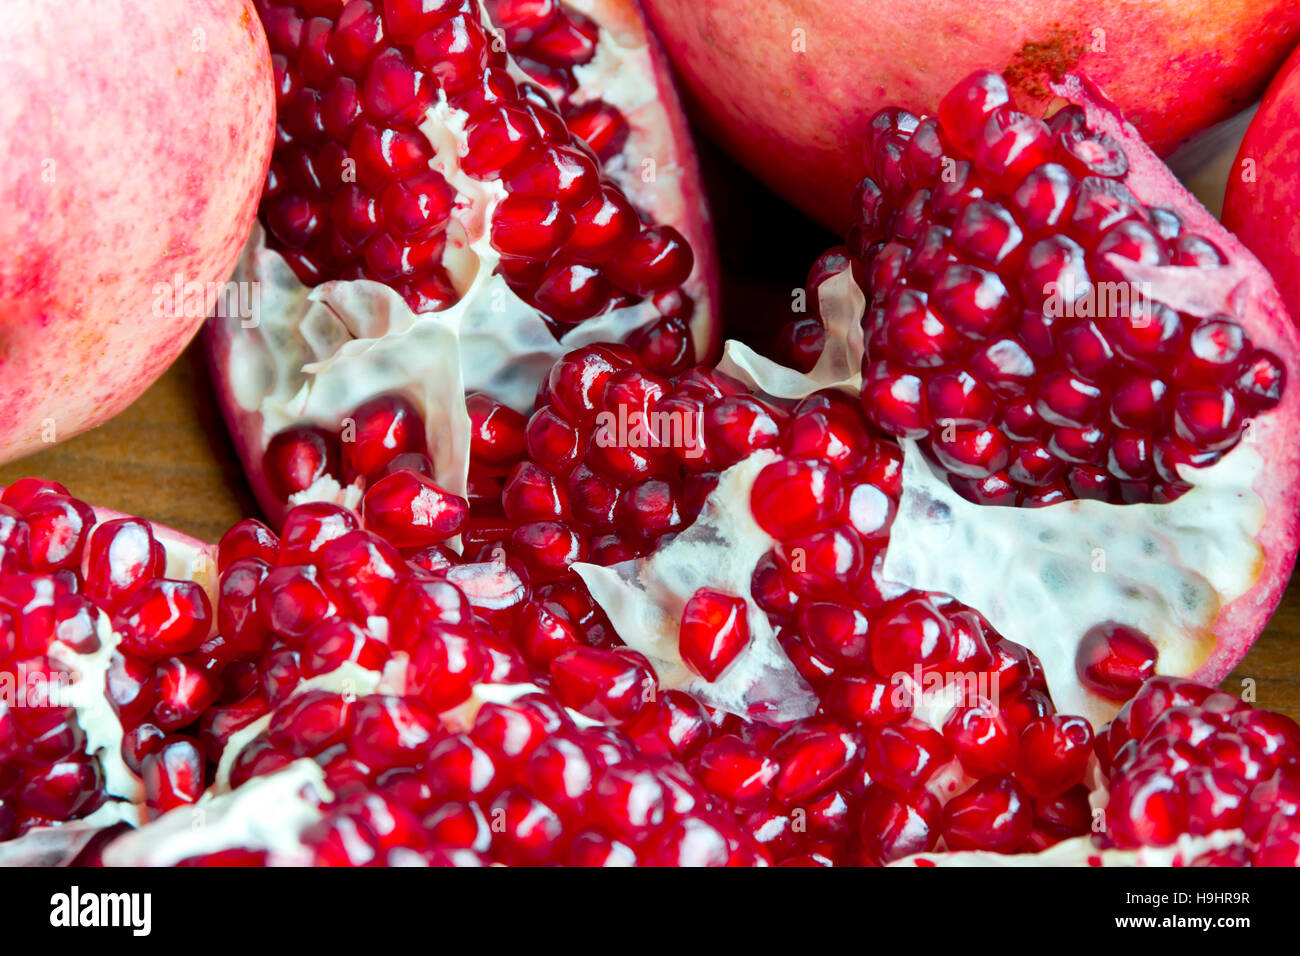 Can opener and pomegranate - open pomegranate for juice Stock Photo - Alamy